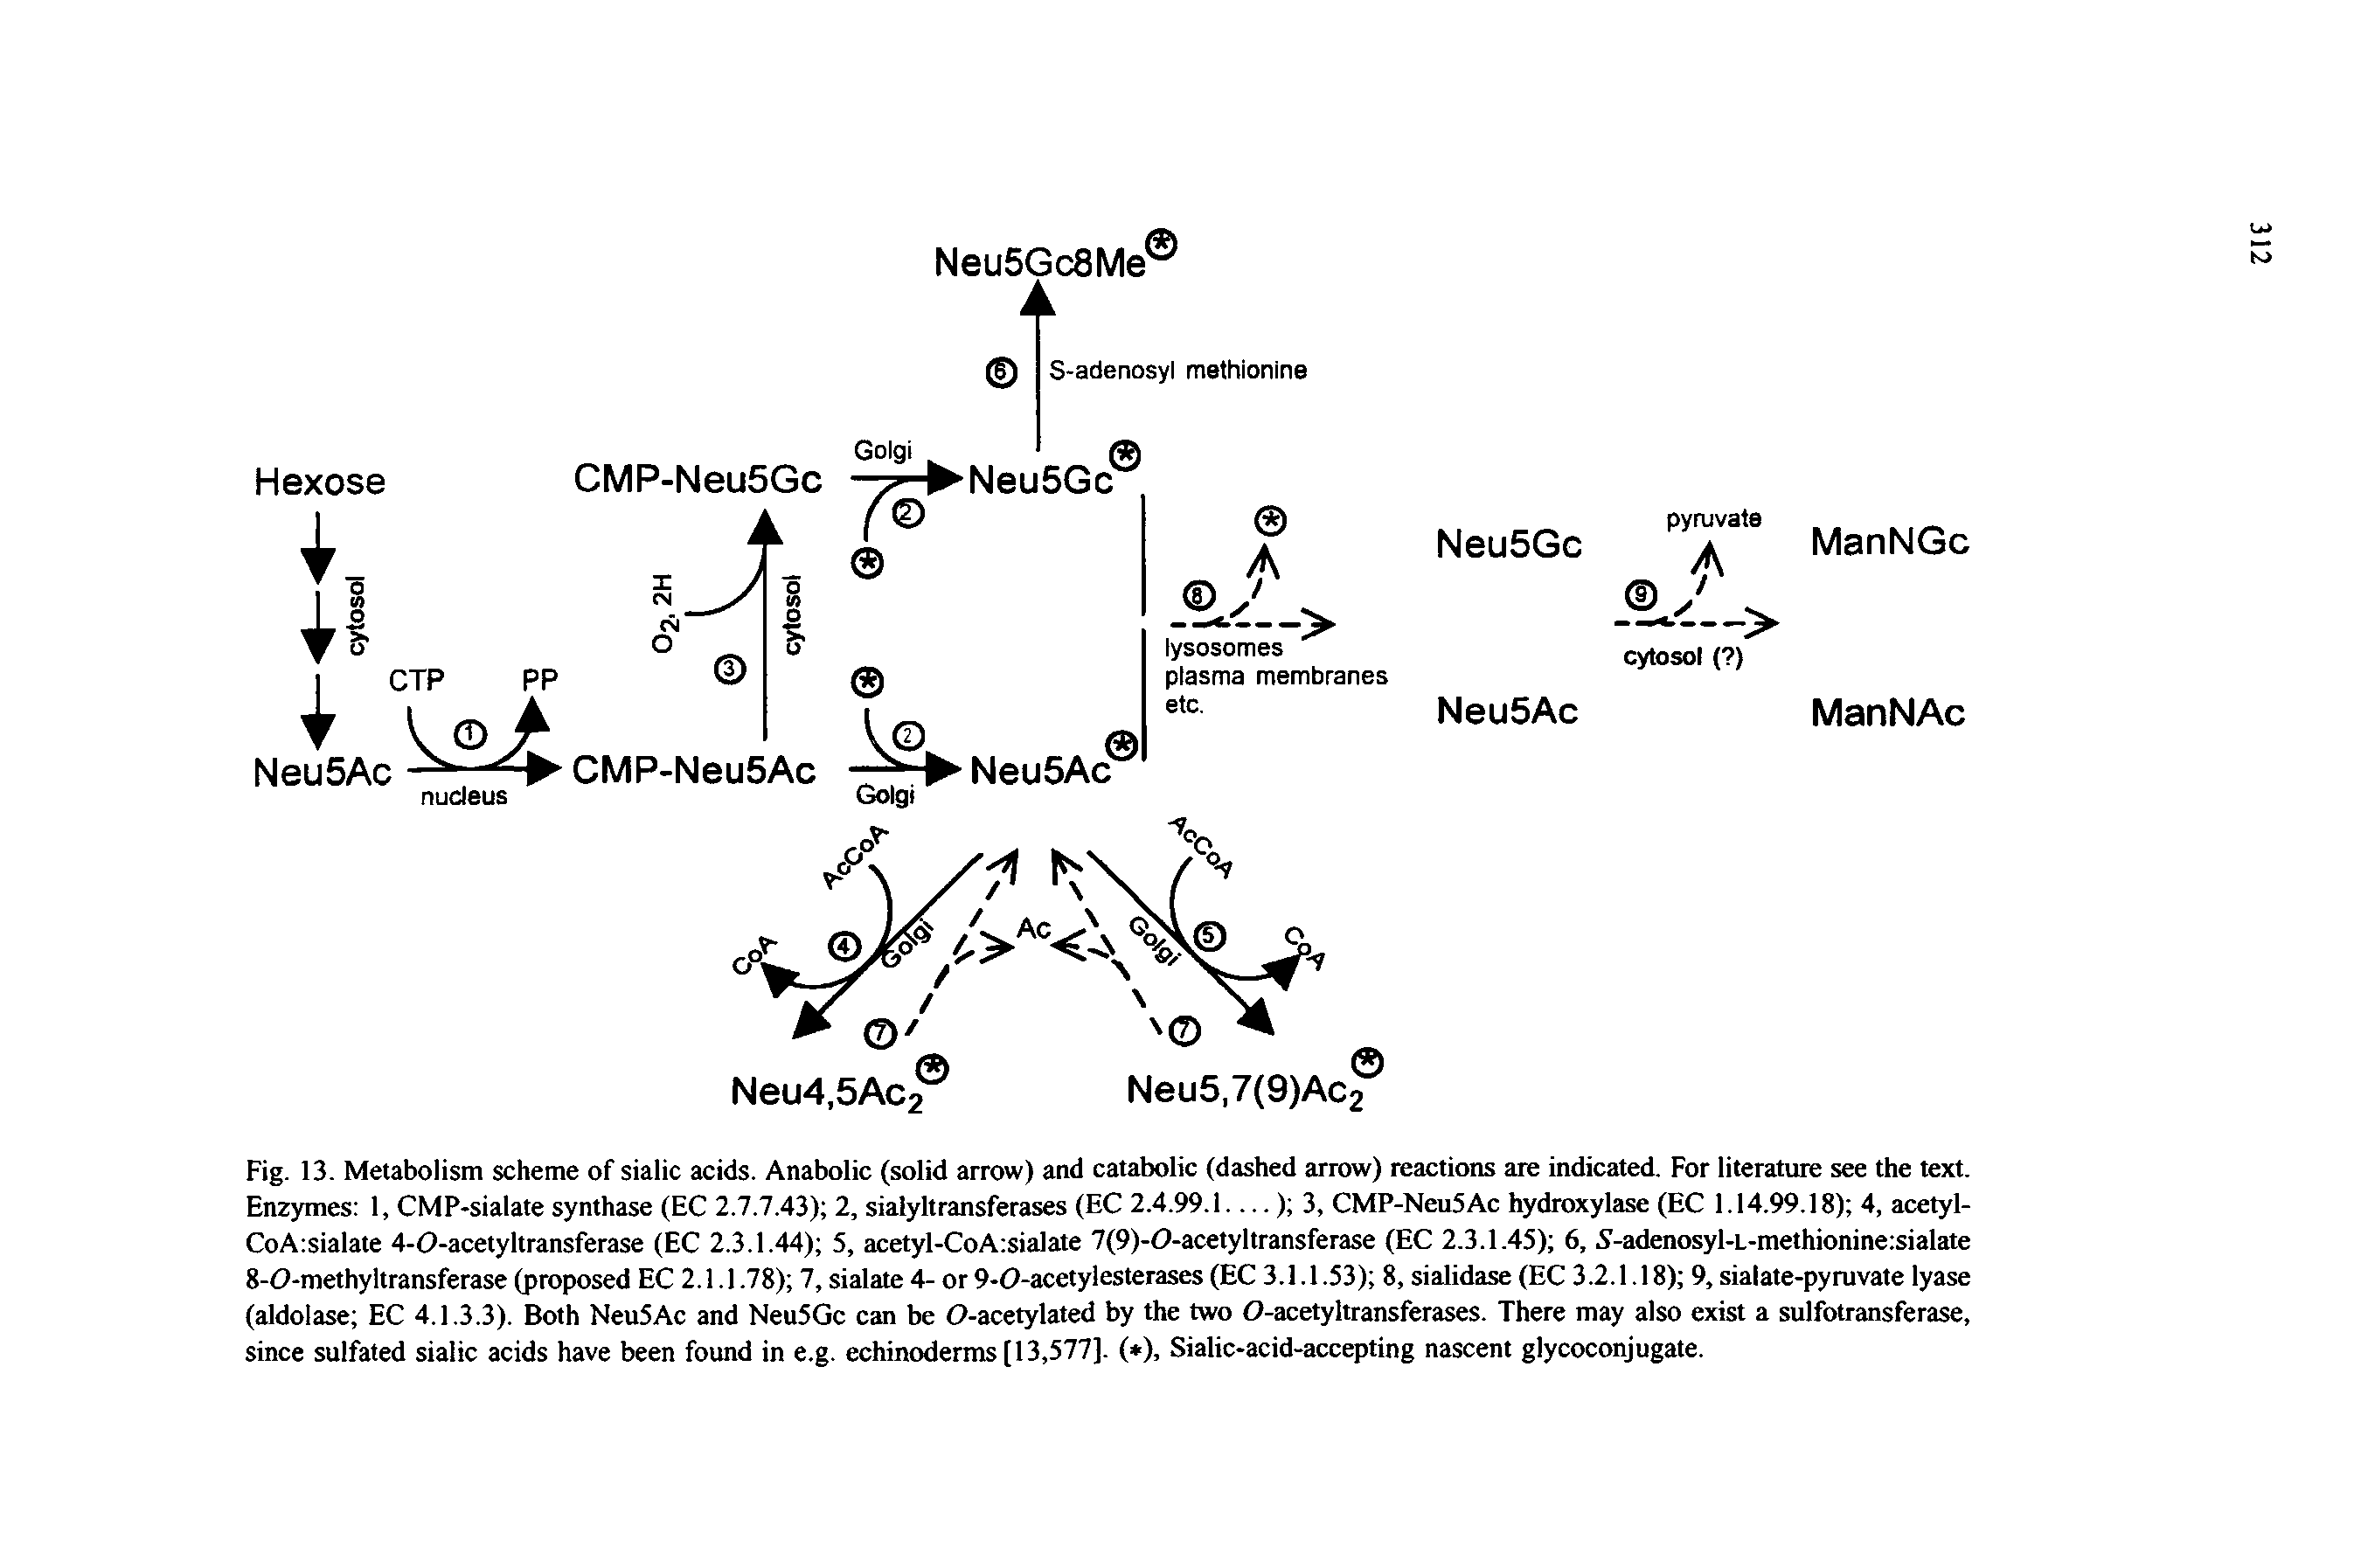 Fig. 13. Metabolism scheme of sialic acids. Anabolic (solid arrow) and catabolic (dashed arrow) reactions are indicated. For literature see the text. Enzymes 1, CMP-sialate synthase (EC 2.7.7.43) 2, sialyltransferases (EC 2.4.99.1.) 3, CMP-Neu5Ac hydroxylase (EC 1.14.99.18) 4, acetyl-CoA sialate 4-0-acetyltransferase (EC 2.3.1.44) 5, acetyl-CoA sialate 7(9)-0-acetyltransferase (EC 2.3.1.45) 6,. S-adenosyl-L-methionine sialate 8-O-methyltransferase (proposed EC 2.1.1.78) 7, sialate 4- or 9-0-acetylesterases (EC 3.1.1.53) 8, sialidase (EC 3.2.1.18) 9, sialate-pyruvate lyase (aldolase EC 4.1.3.3). Both Neu5Ac and Neu5Gc can be O-acetylated by the two O-acetyltransferases. There may also exist a sulfotransferase, since sulfated sialic acids have been found in e.g. echinoderms [13,577]. ( ), Sialic-acid-accepting nascent glycoconjugate.